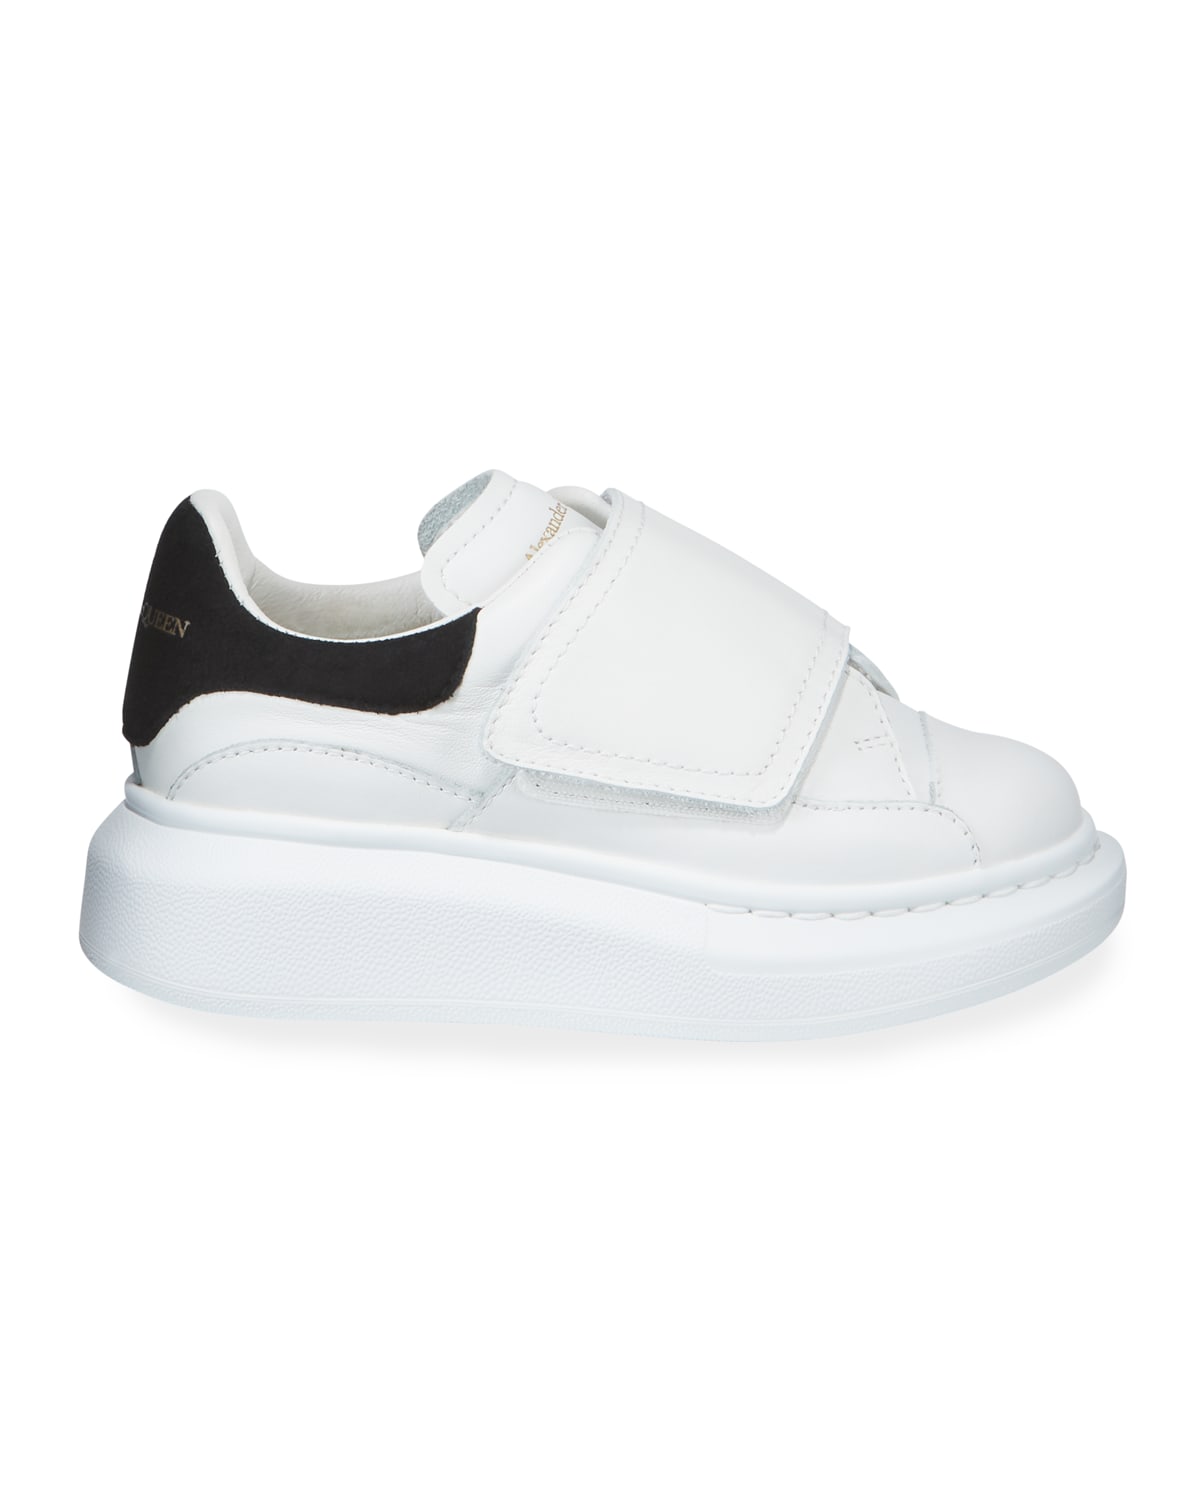 Oversized Grip-Strap Leather Sneakers, Toddler/Kids